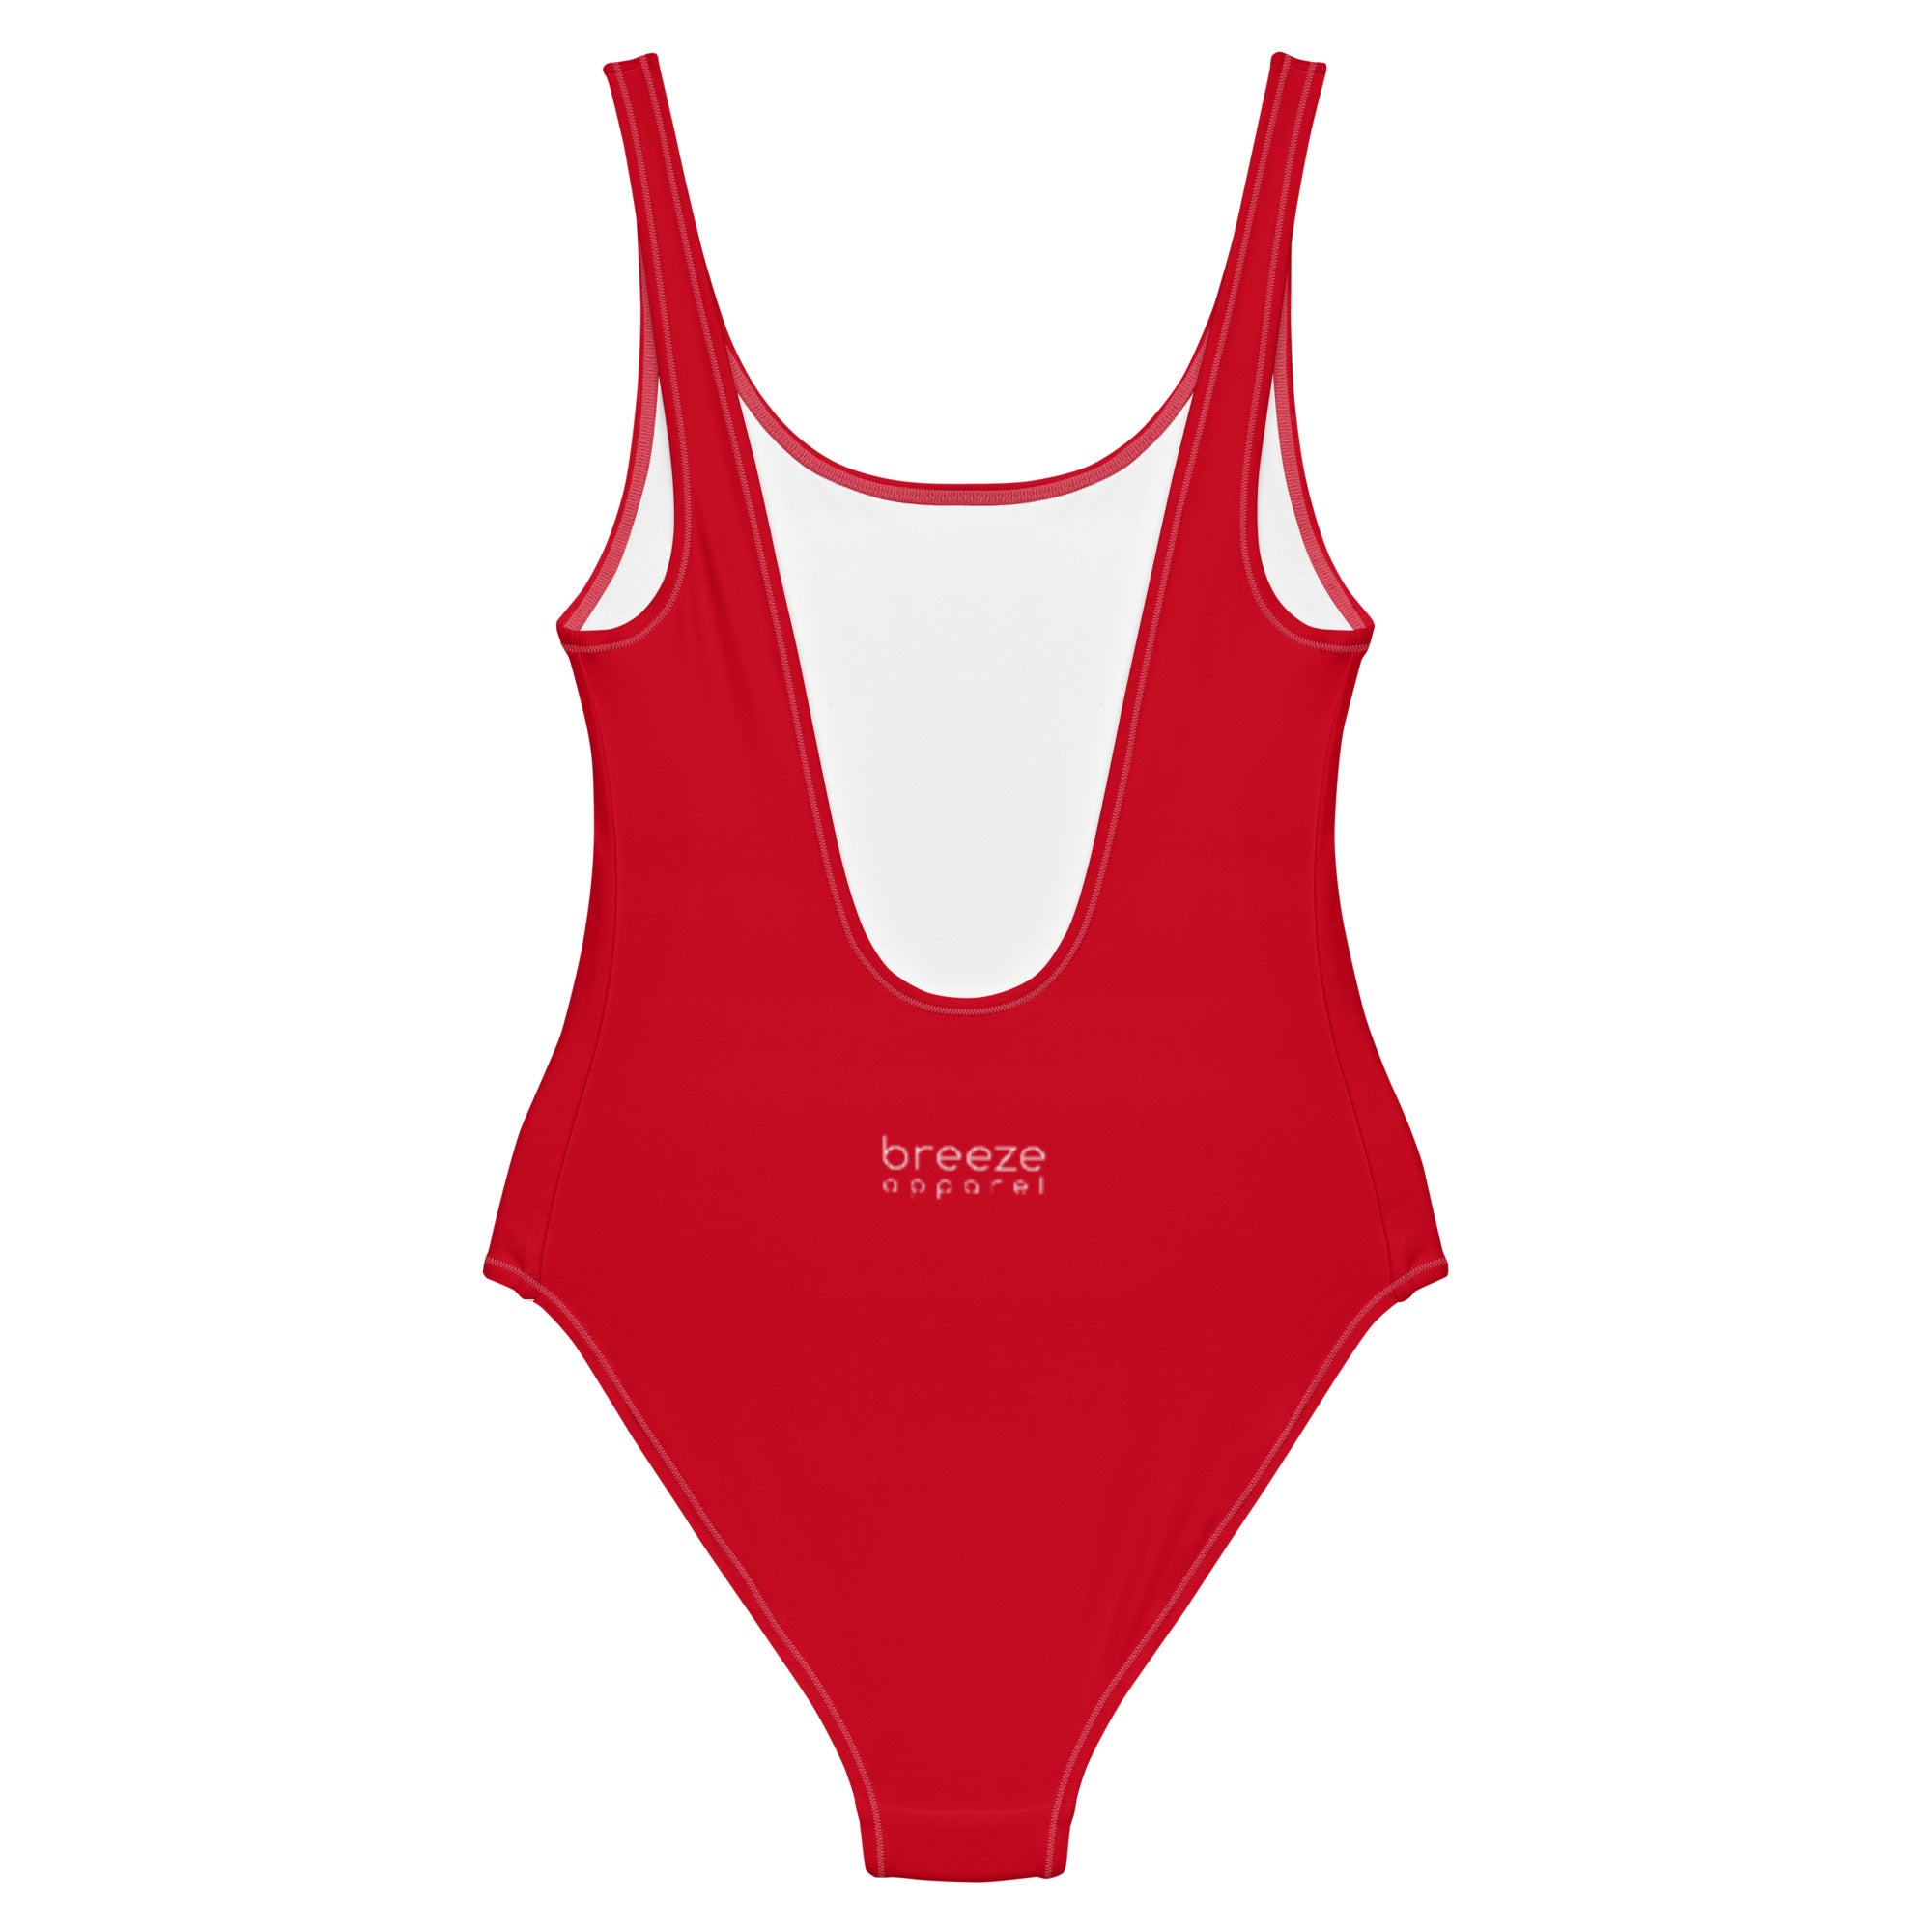 'Cherry Red' one-piece swimsuit